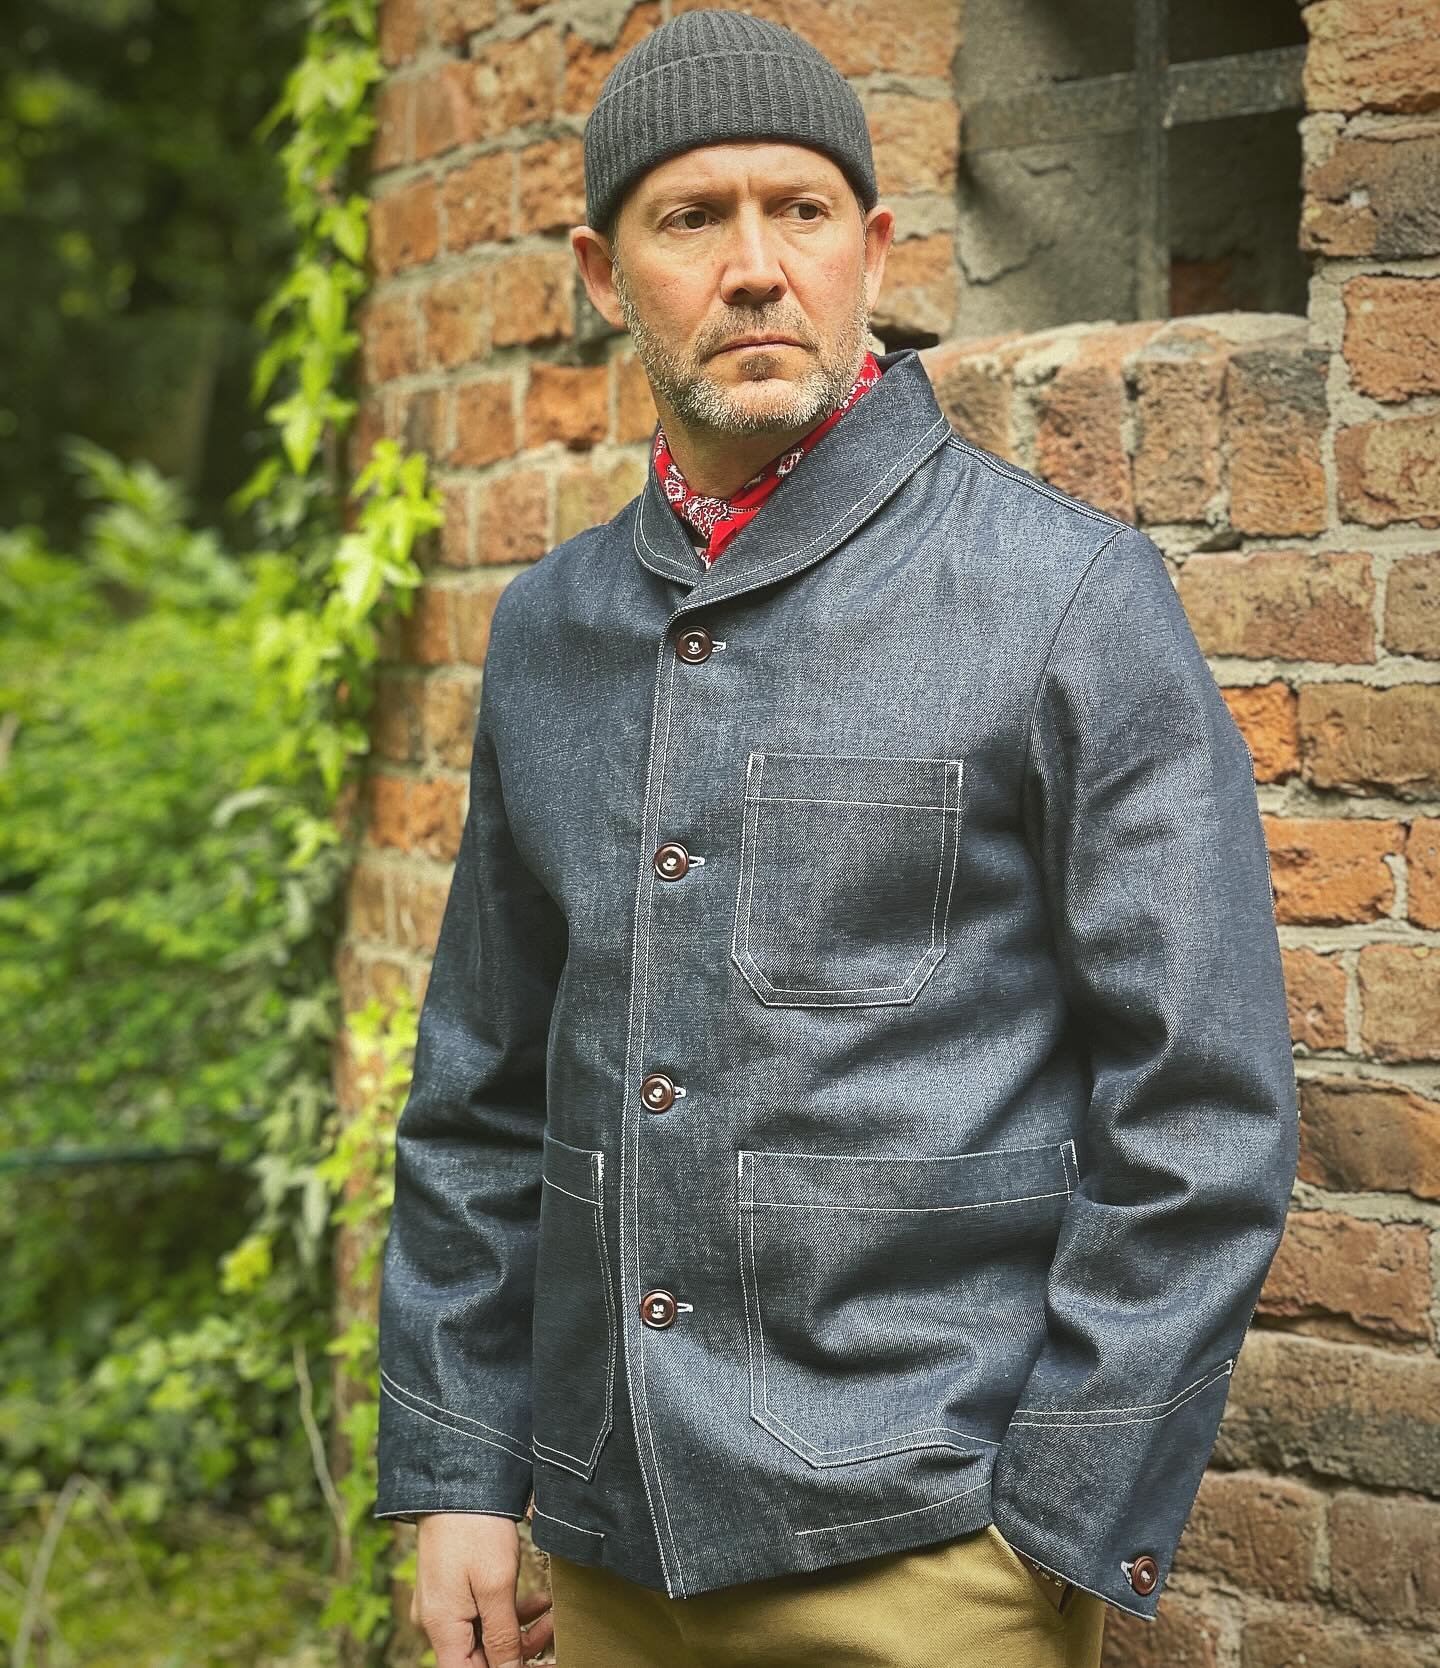 Tomorrow
Limited to 100 💙 collection.
US Navy Shawl Collar Coverall - Hit the product link for more item details. Raw &amp; Wash versions &mdash;&mdash;-&gt;
The original shawl collar coverall was first produced in 1901 as a pullover type. In 1918 a